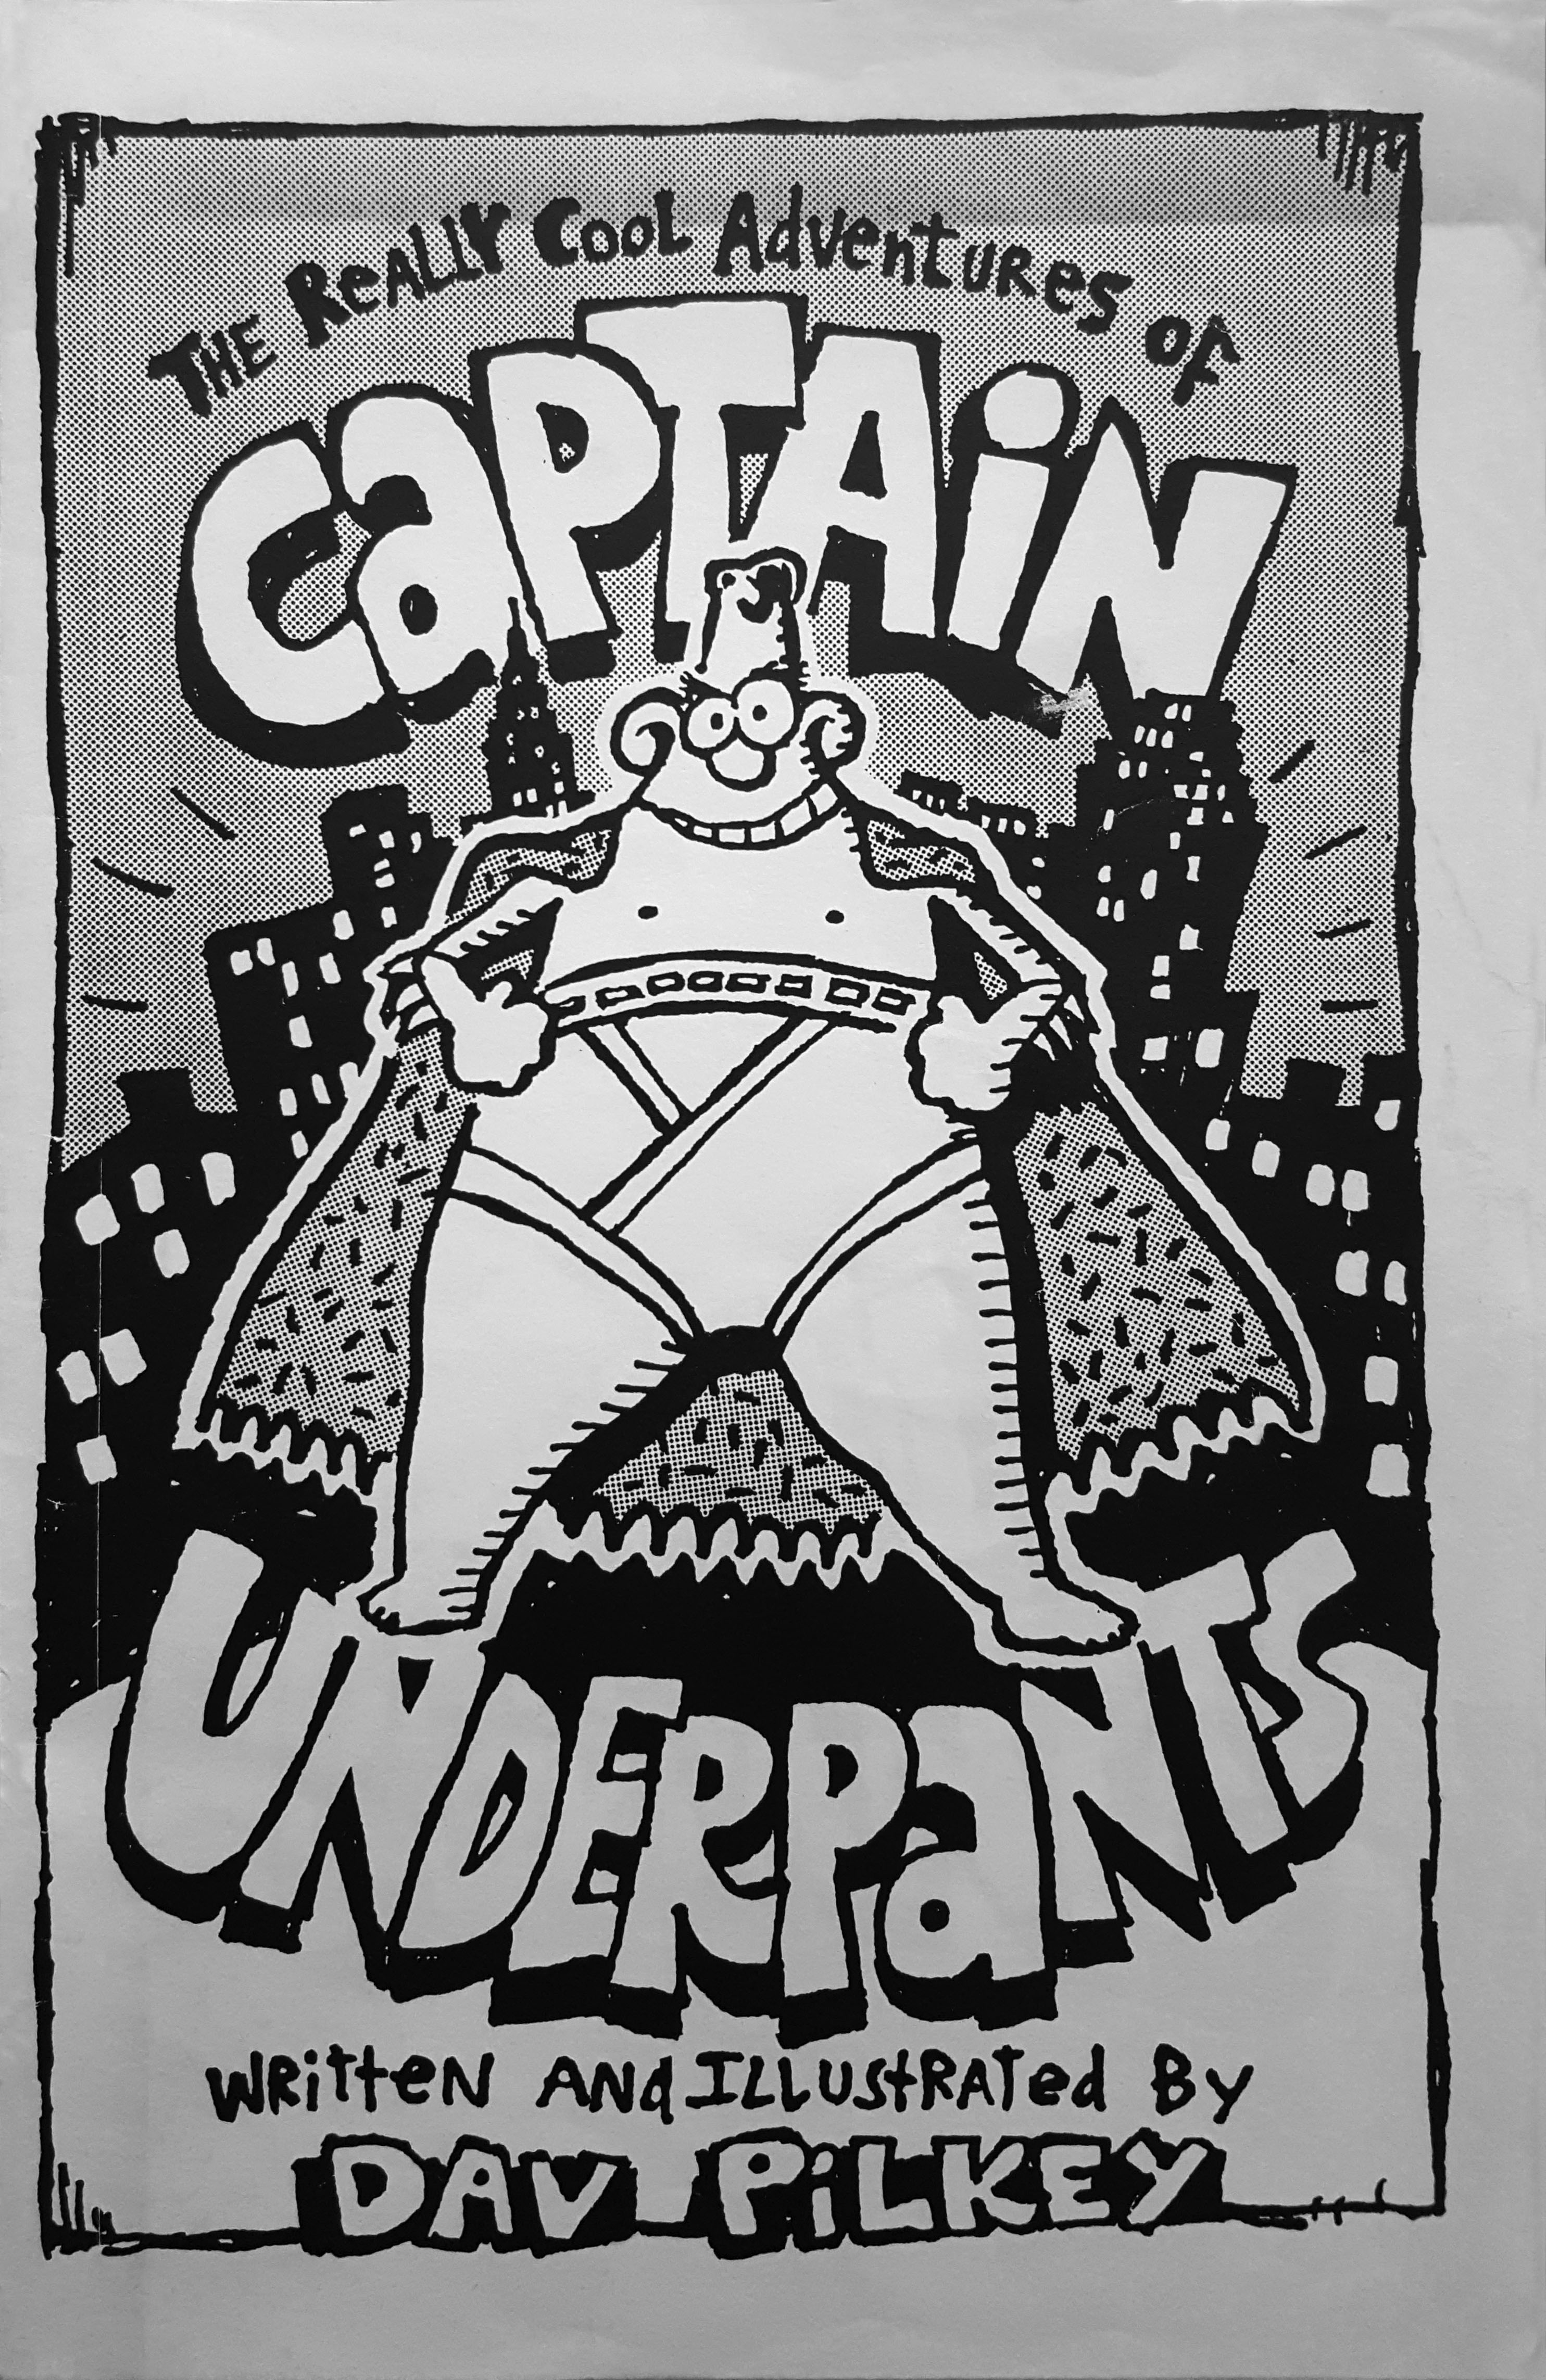 The Really Cool Adventures of Captain Underpants (lost self